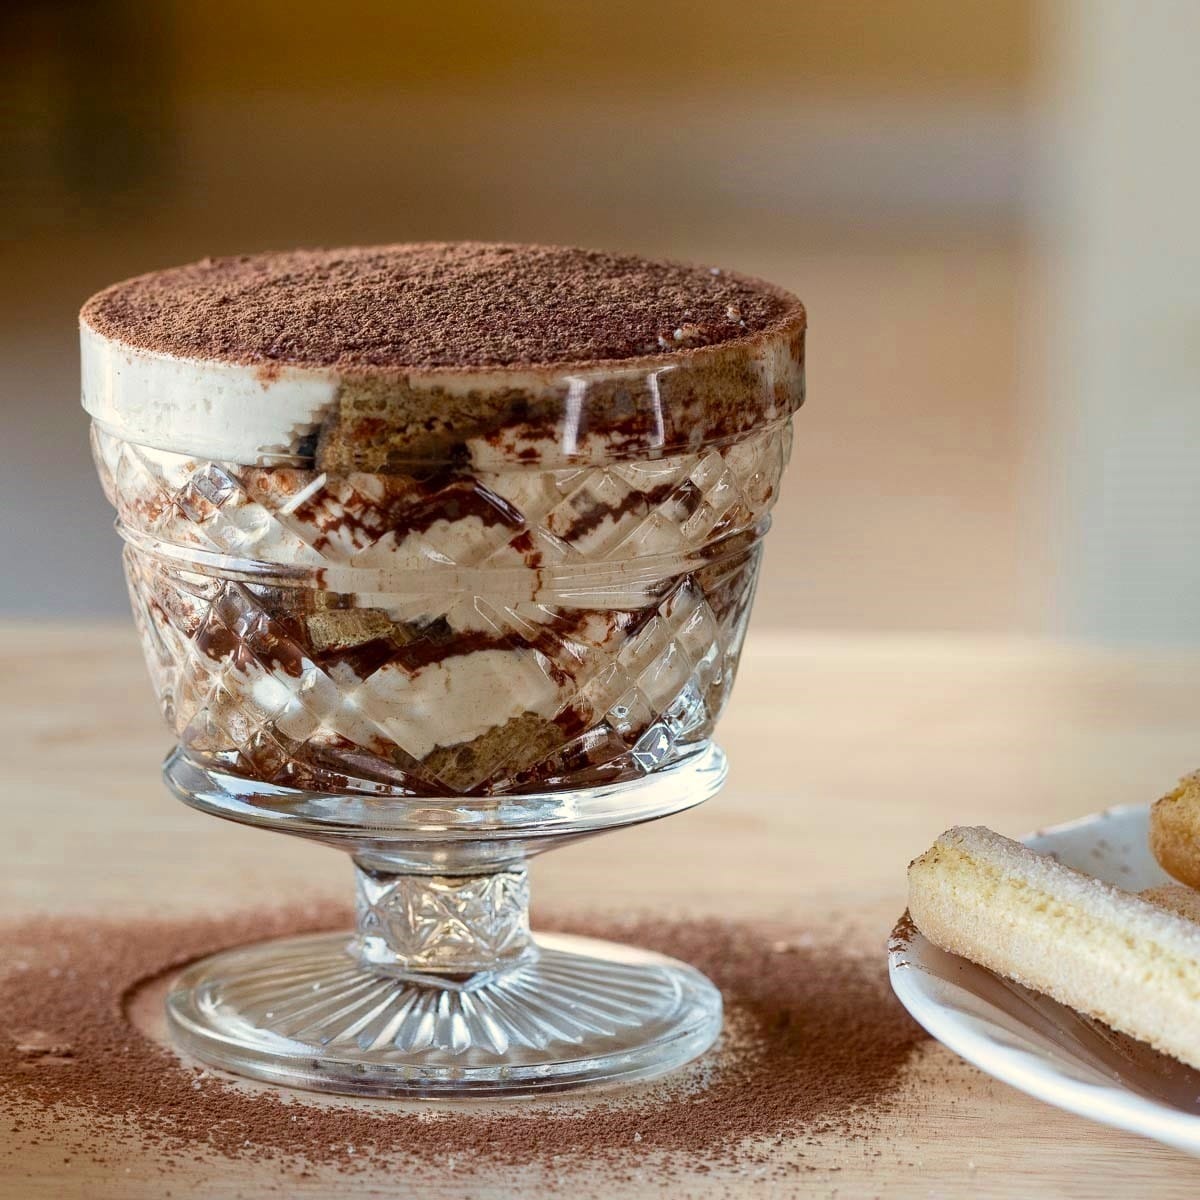 Freshly made tiramisu cup just dusted with cocoa powder.